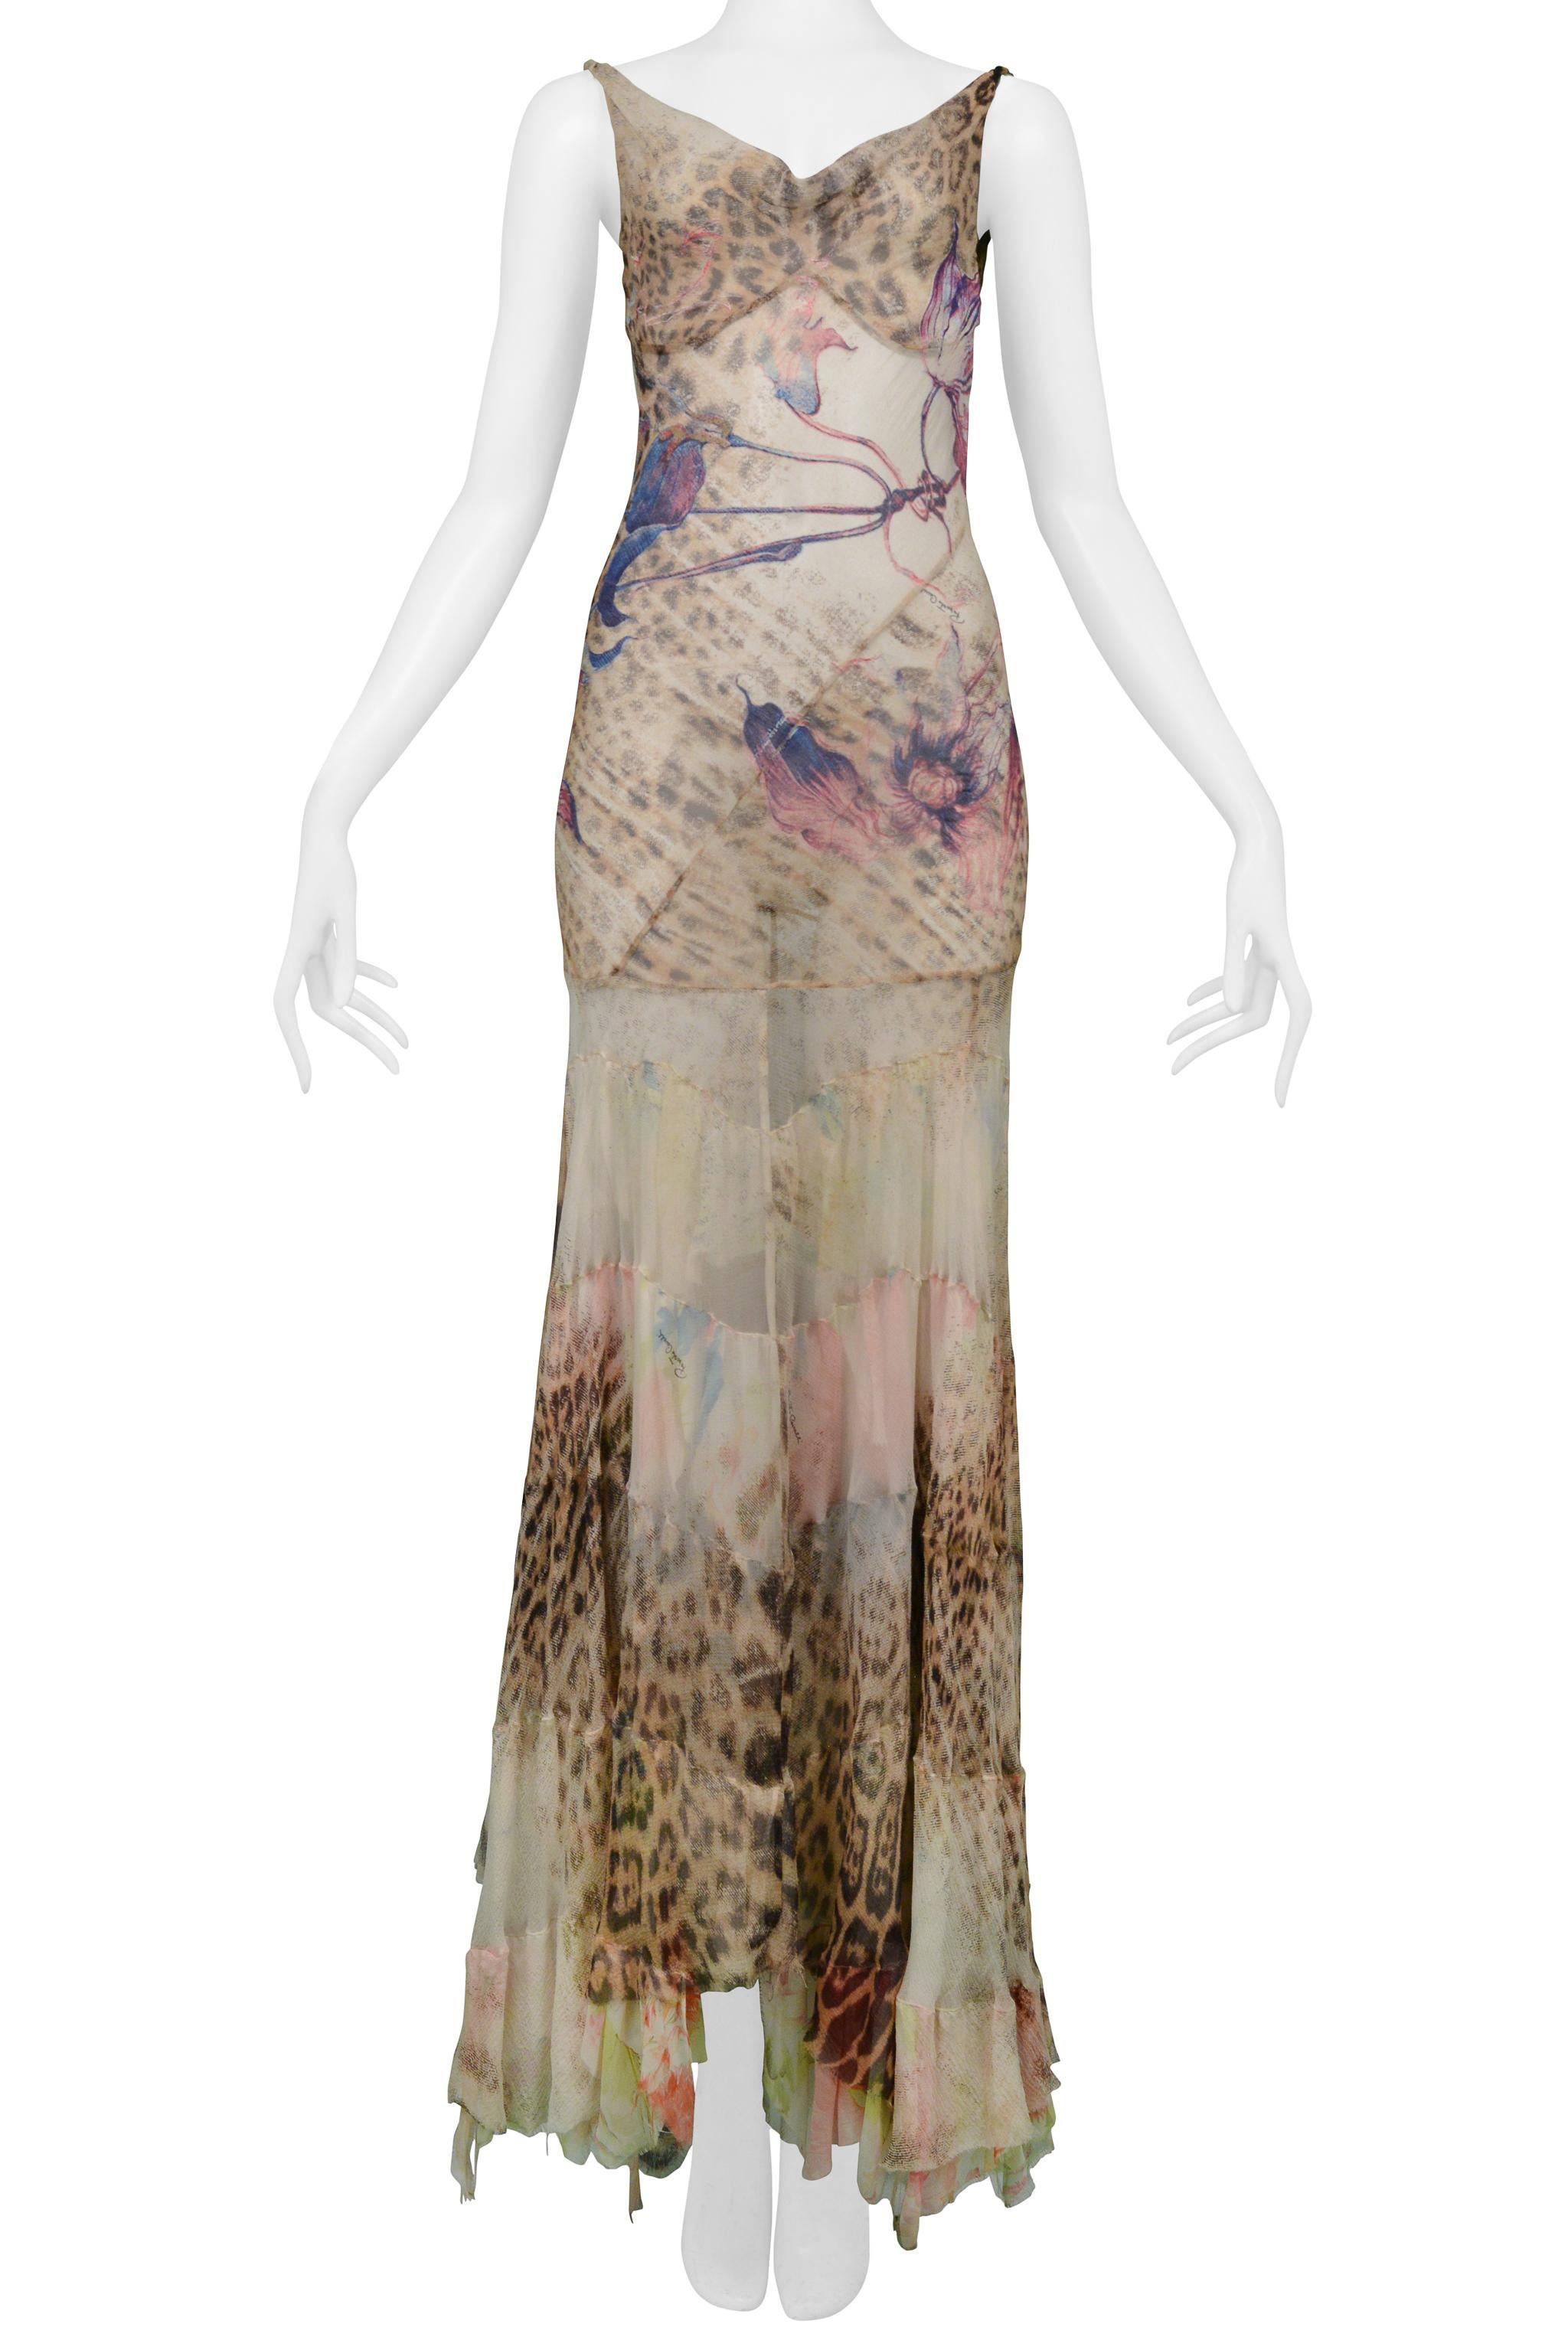 Roberto Cavalli Floral & Leopard Print Evening Gown 2002 In Excellent Condition In Los Angeles, CA